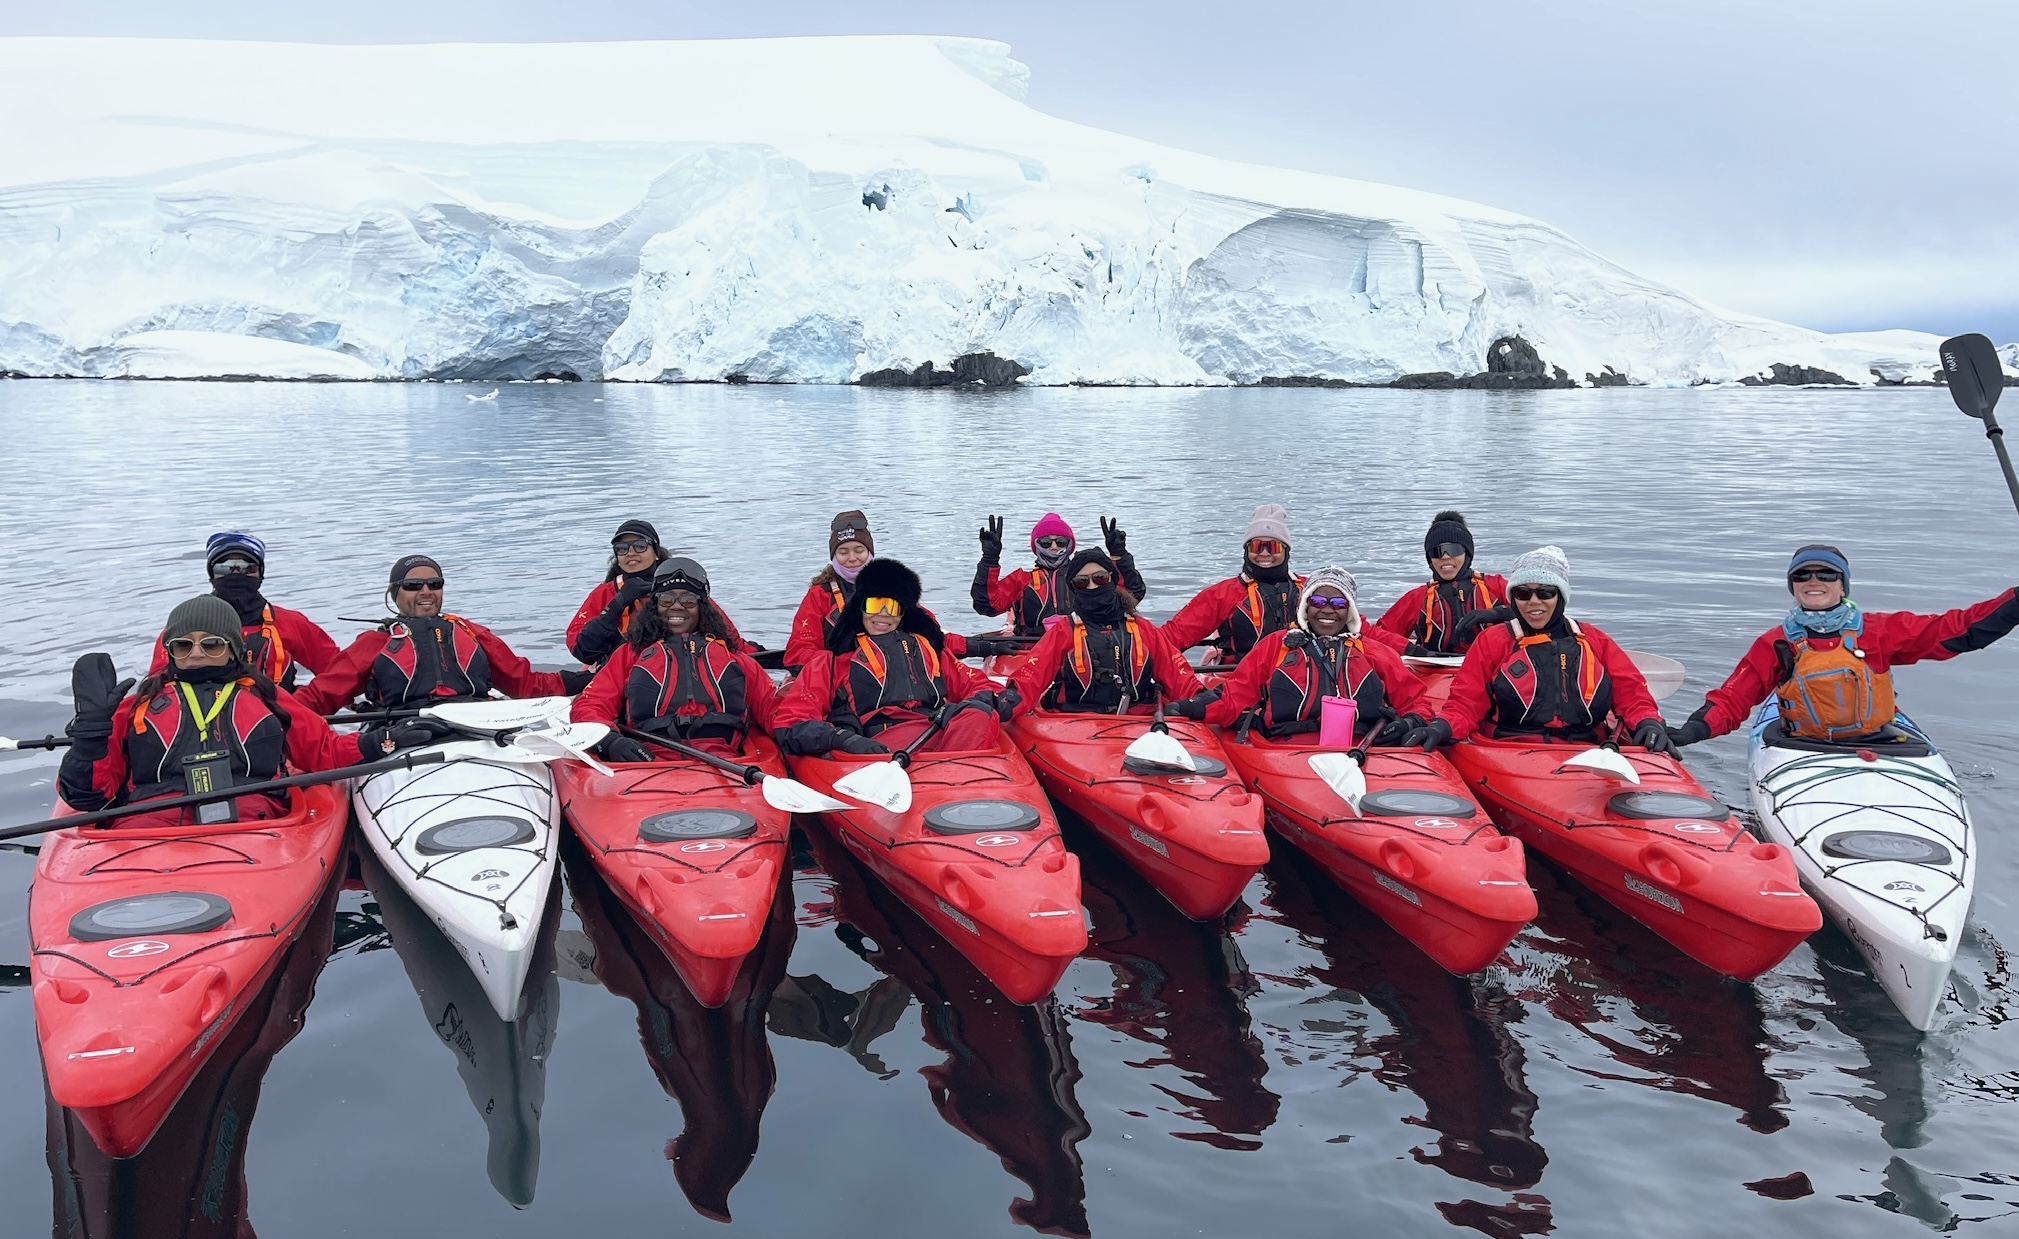 The 14 Black women of "Sistahs to the Summit" conquered Antarctica in January 2024. Photo credit: Sistahs to the Summit